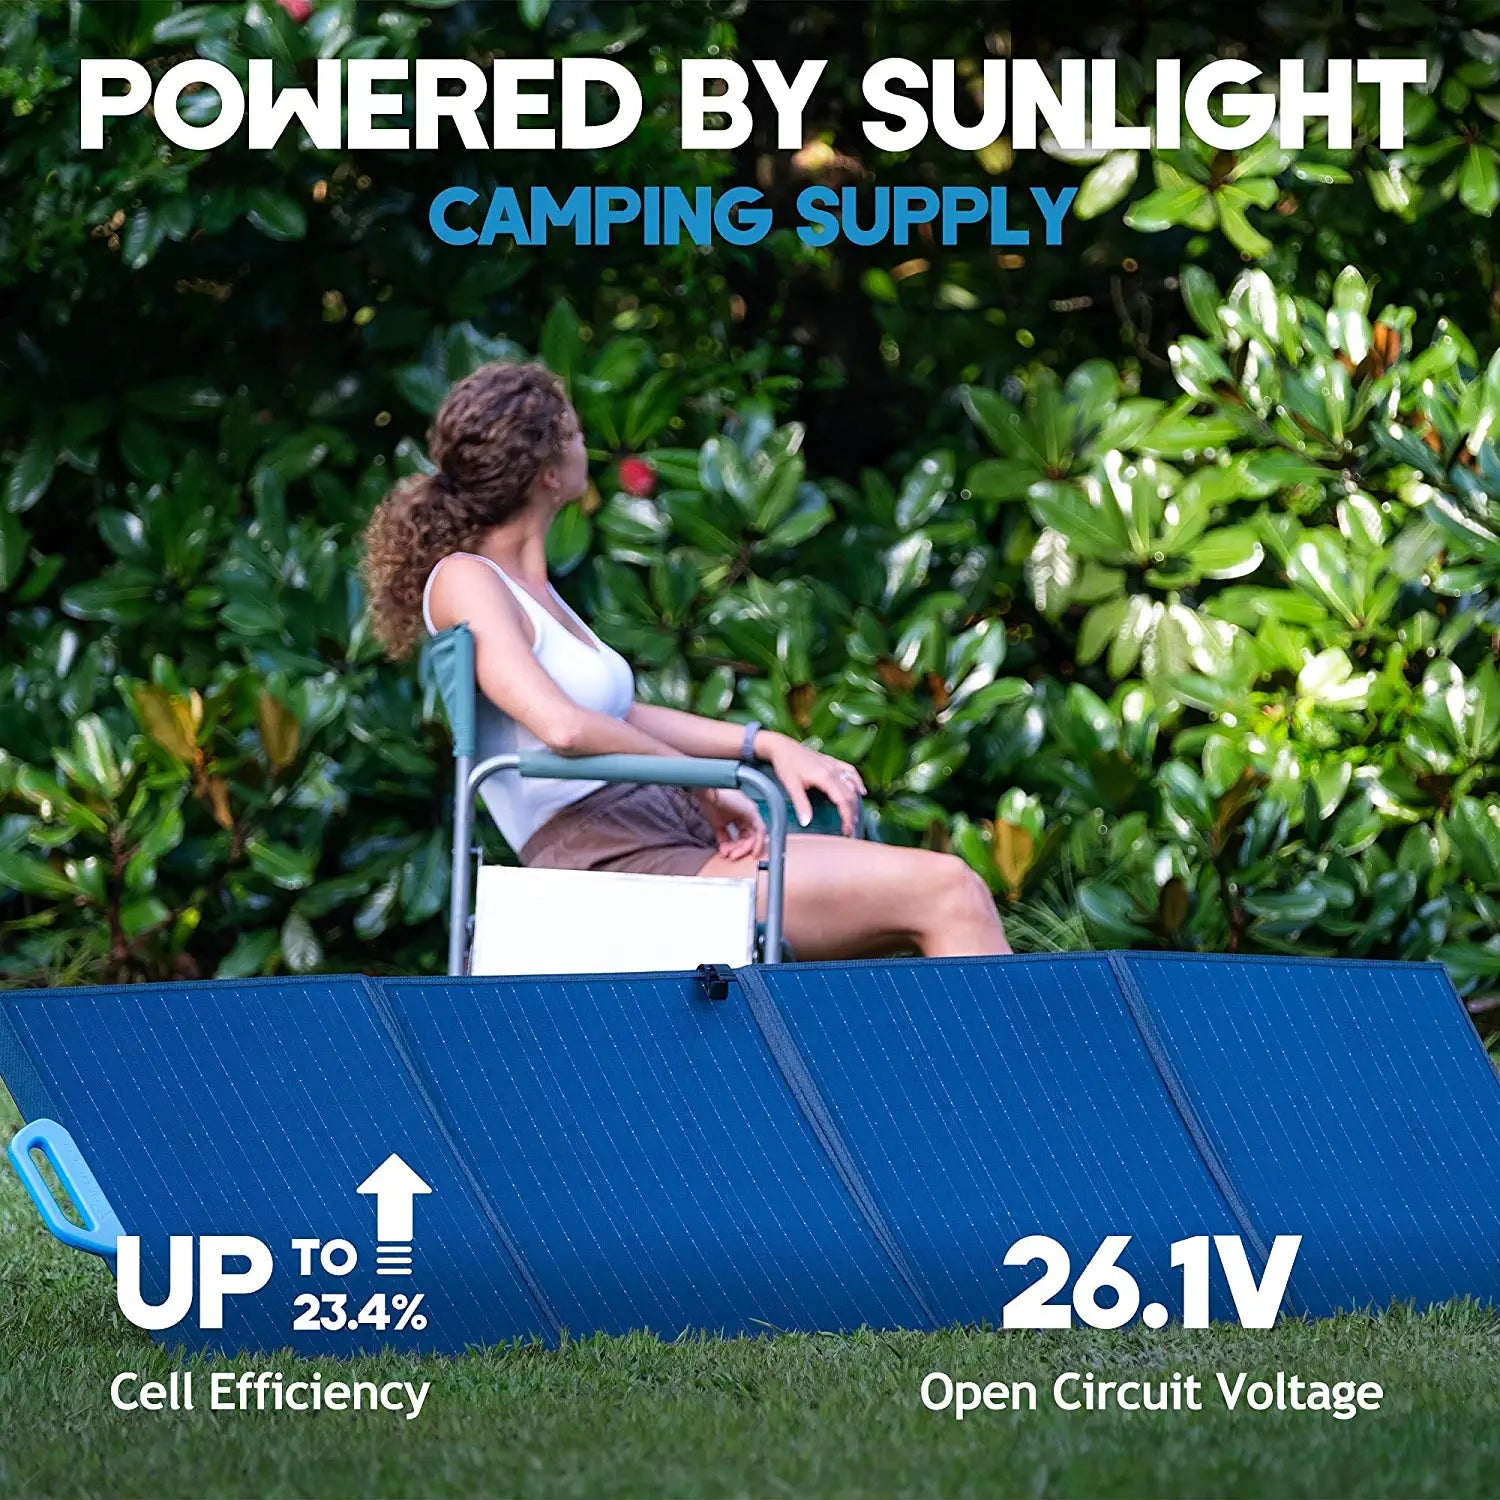 POWERED BY SUNLIGHT CAMPING SUPP